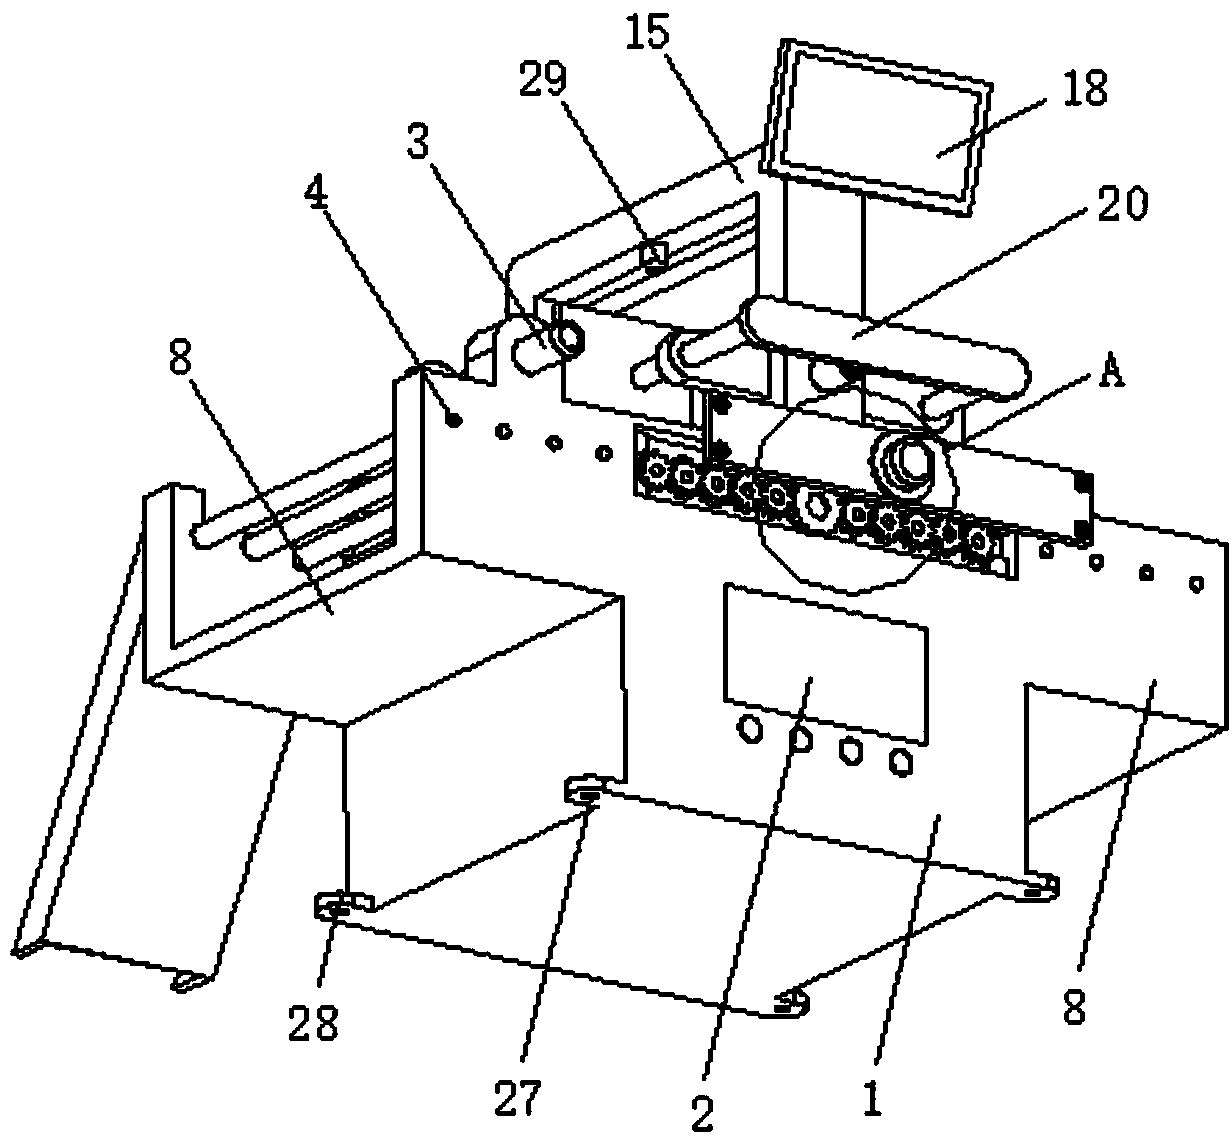 Packaging device for molding processing system of packaging cartons